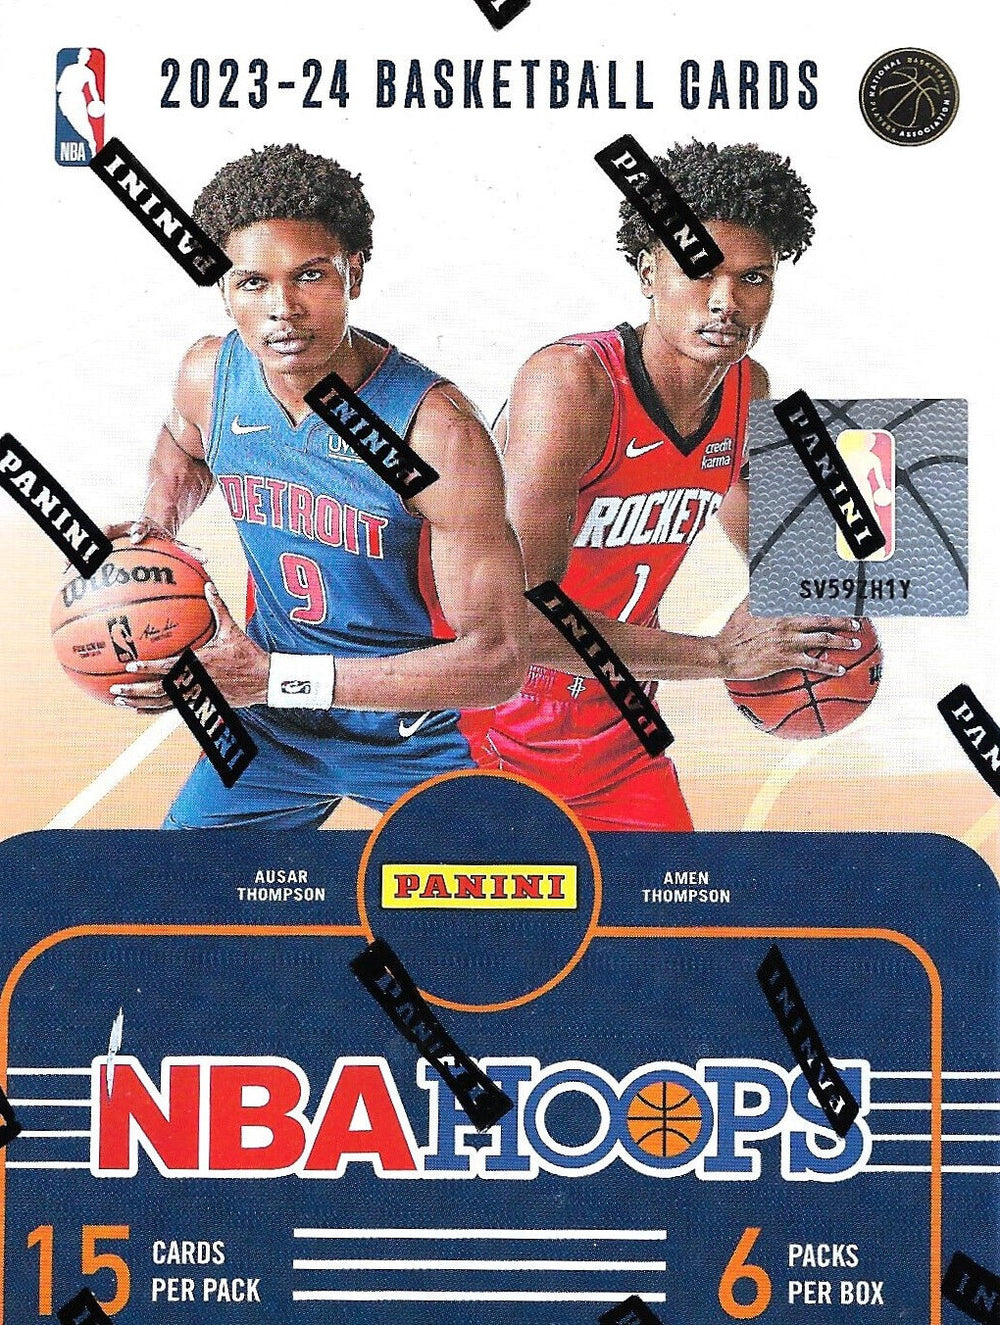 2023 2024 Panini HOOPS NBA Blaster Box of Packs (90 Cards) with Possible Retail Exclusive Insert Cards and Victor Wembanyama Rookie Card